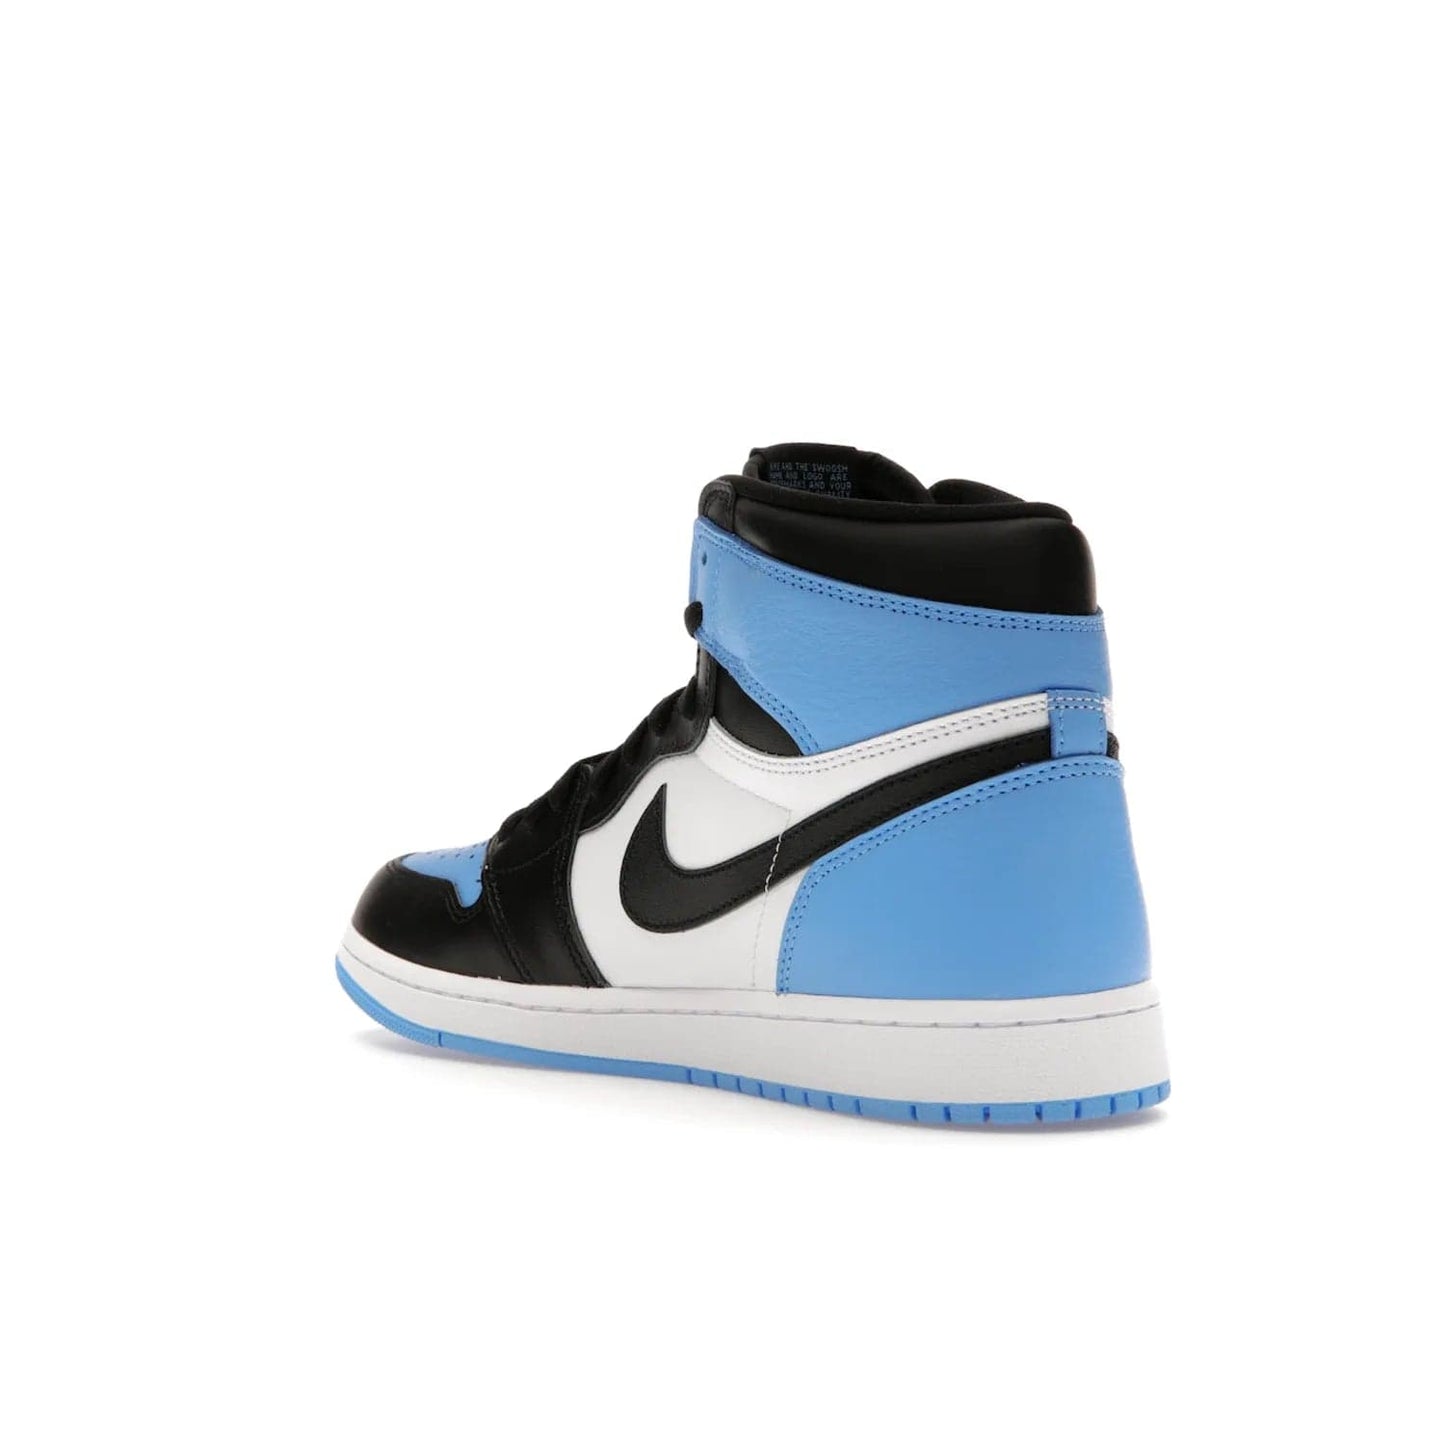 Jordan 1 Retro High OG UNC Toe - Image 24 - Only at www.BallersClubKickz.com - Jordan 1 High OG UNC Toe is a fashionable, high-quality sneaker featuring University Blue, Black White and White. Releasing July 22, 2023, it's the perfect pick up for sneakerheads.